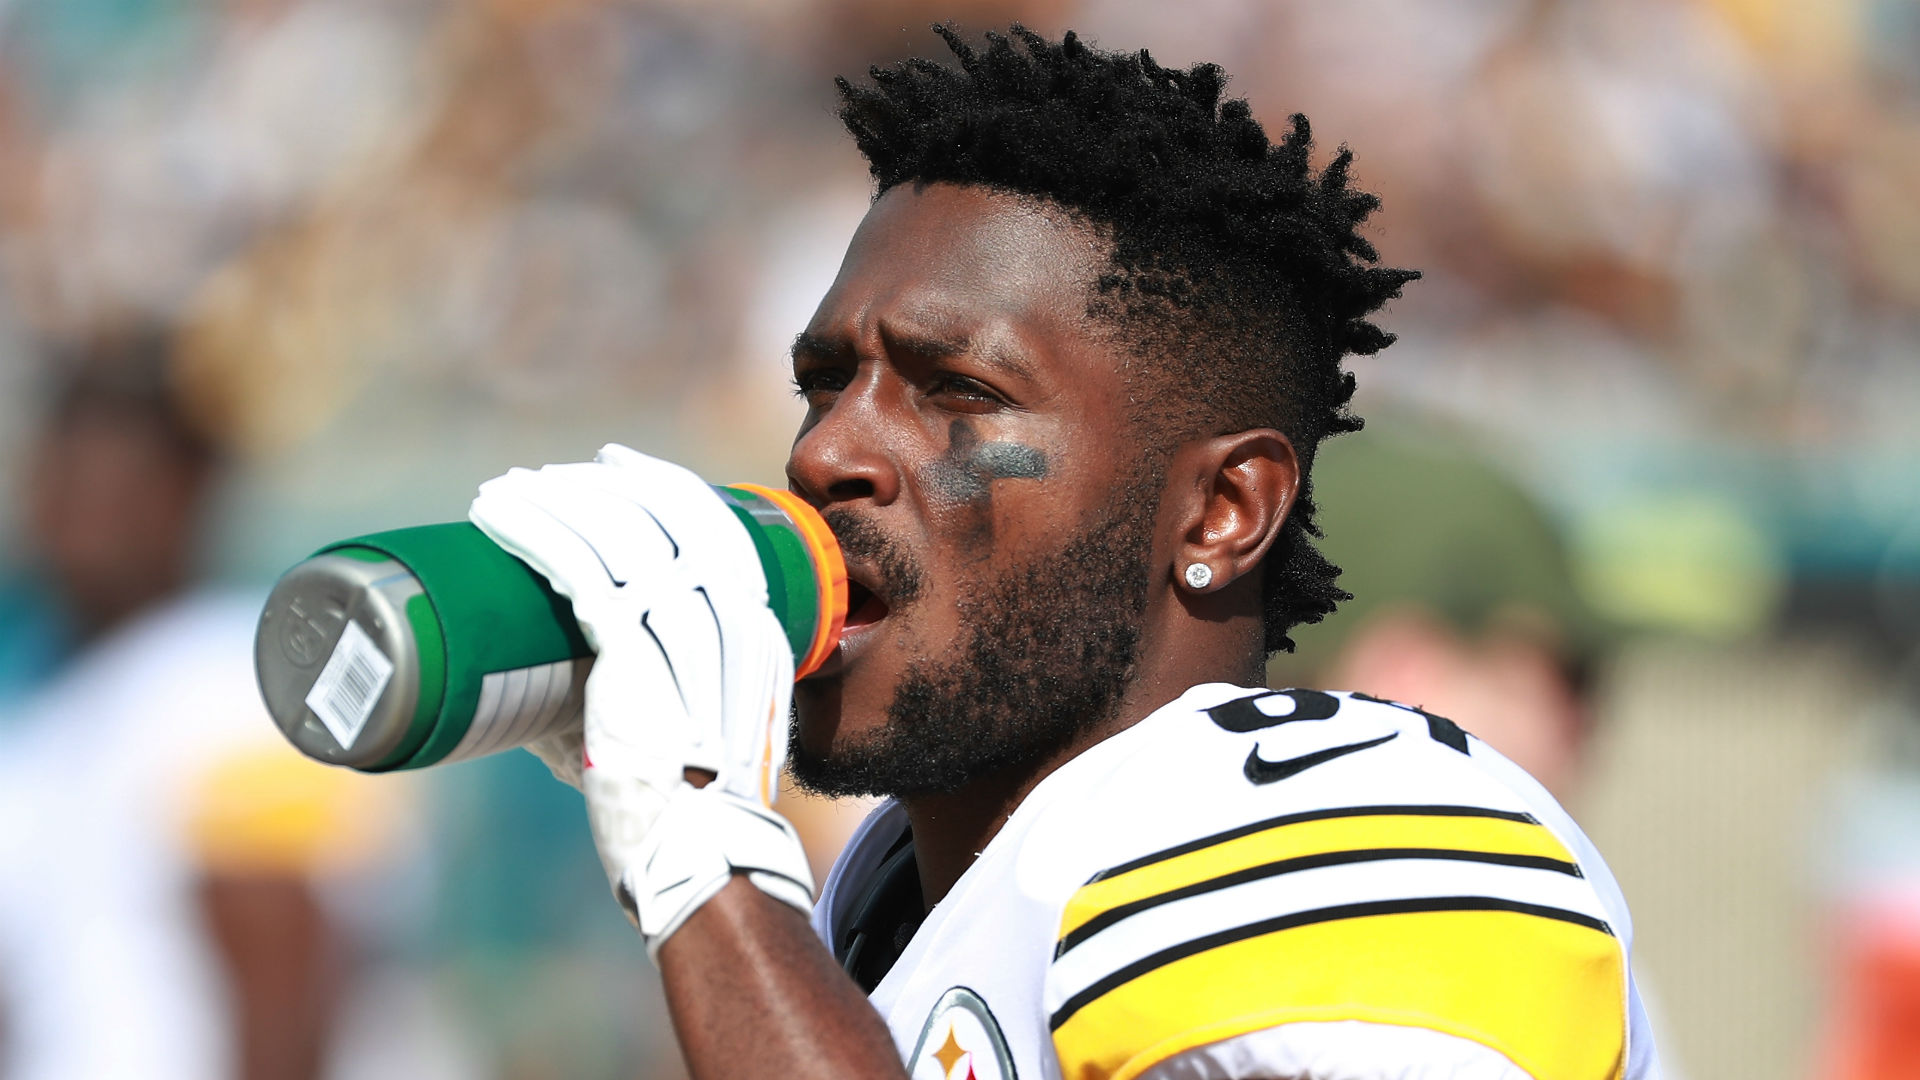 In an episode of Hard Knocks, Oakland Raiders wide receiver Antonio Brown explained how he sustained a foot injury when having cold therapy.